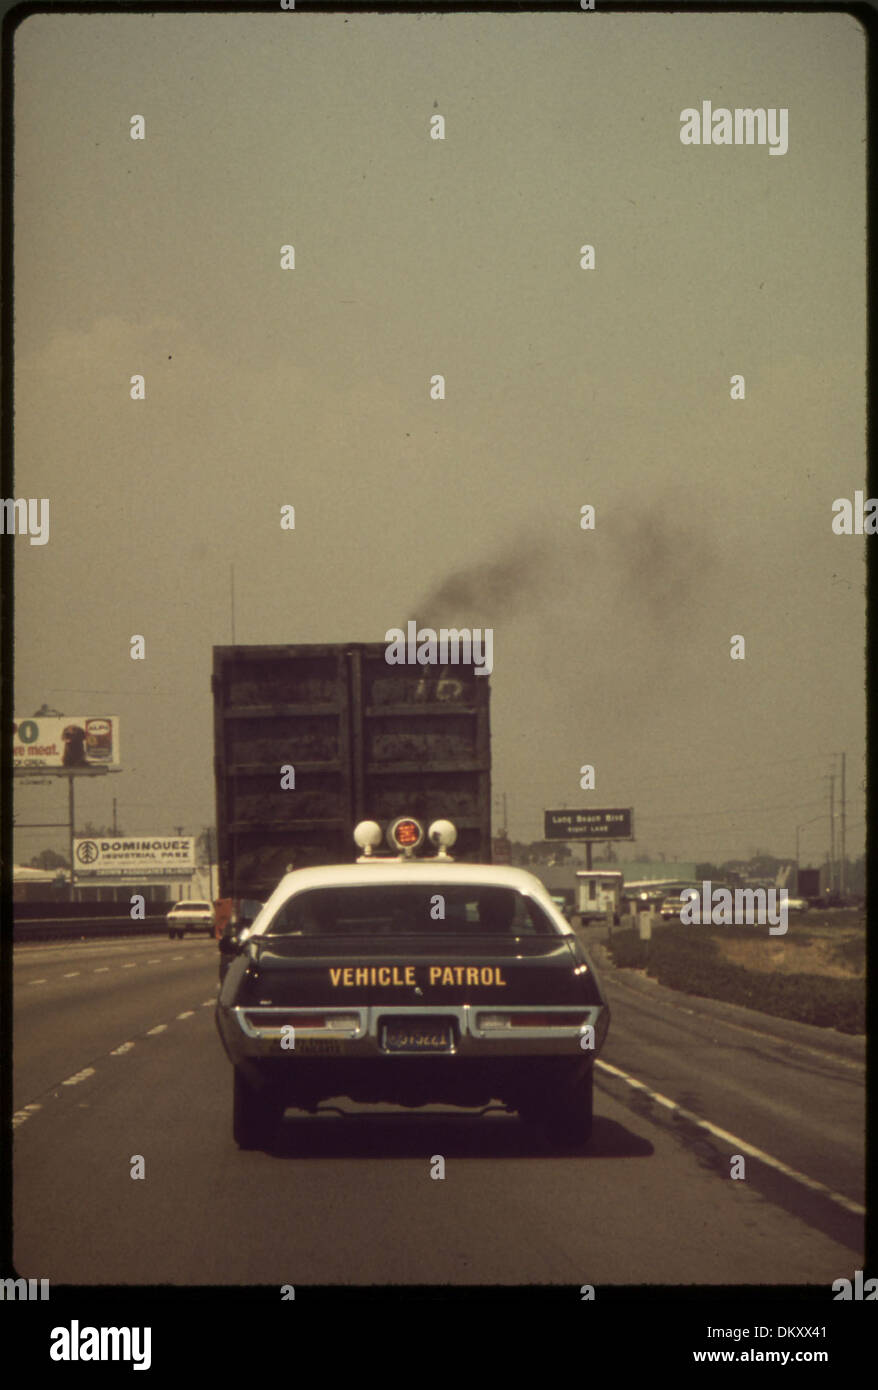 AIR POLLUTION CONTROL DEPARTMENT OFFICERS FOLLOWING TRUCK VIOLATOR (WHO LATER RECEIVED A CITATION) 542755 Stock Photo